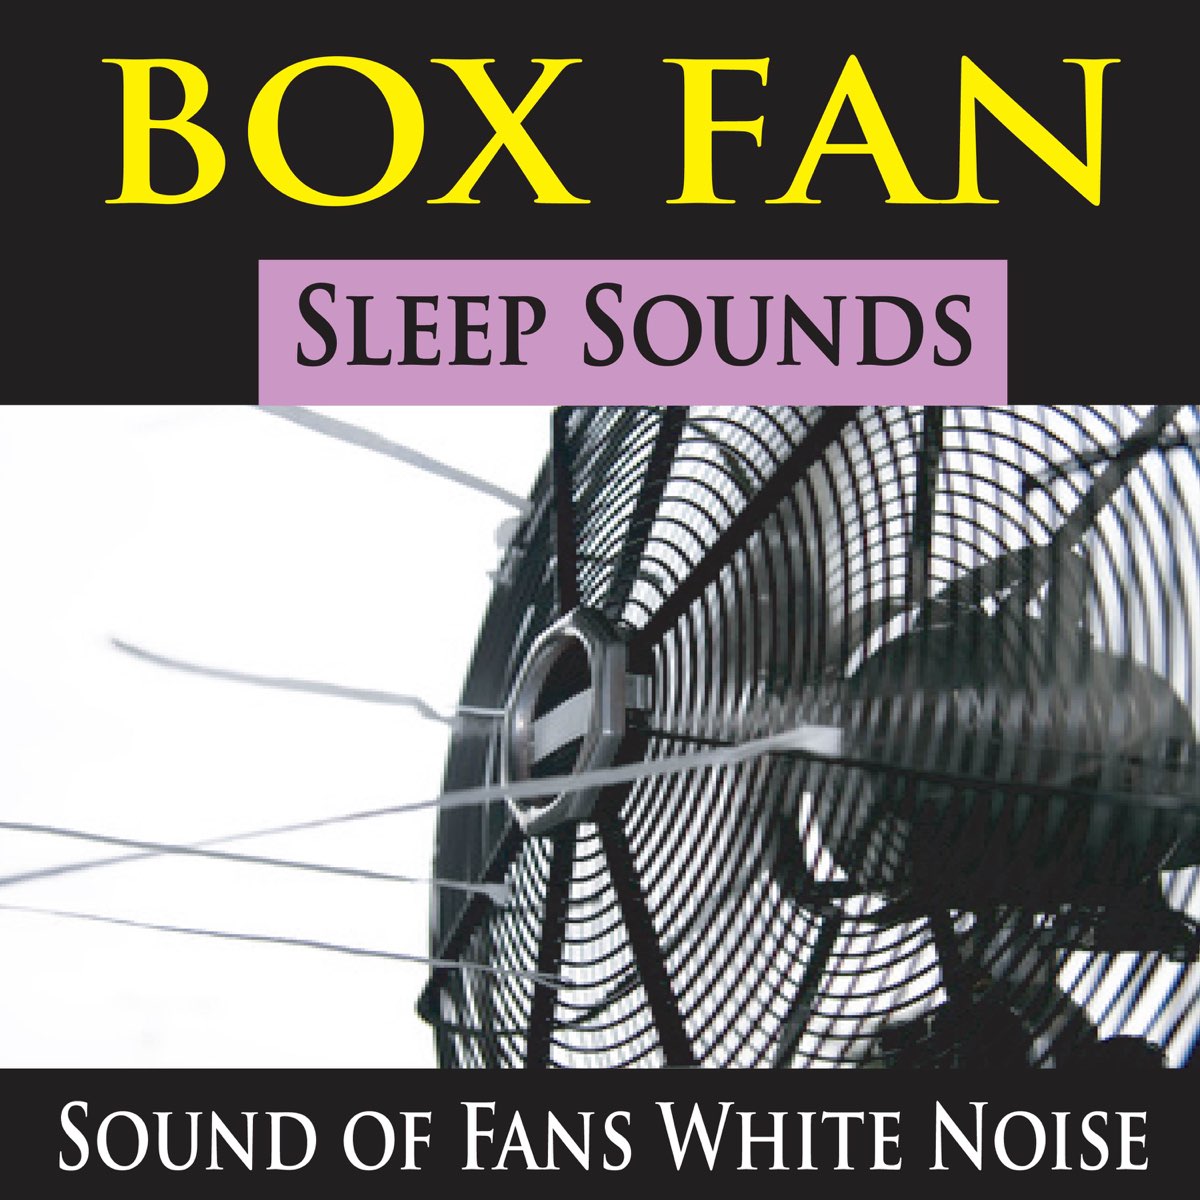 Box Fan Sleep Sounds (Sound of Fans White Noise) - Album by Pure Pianogonia  - Apple Music